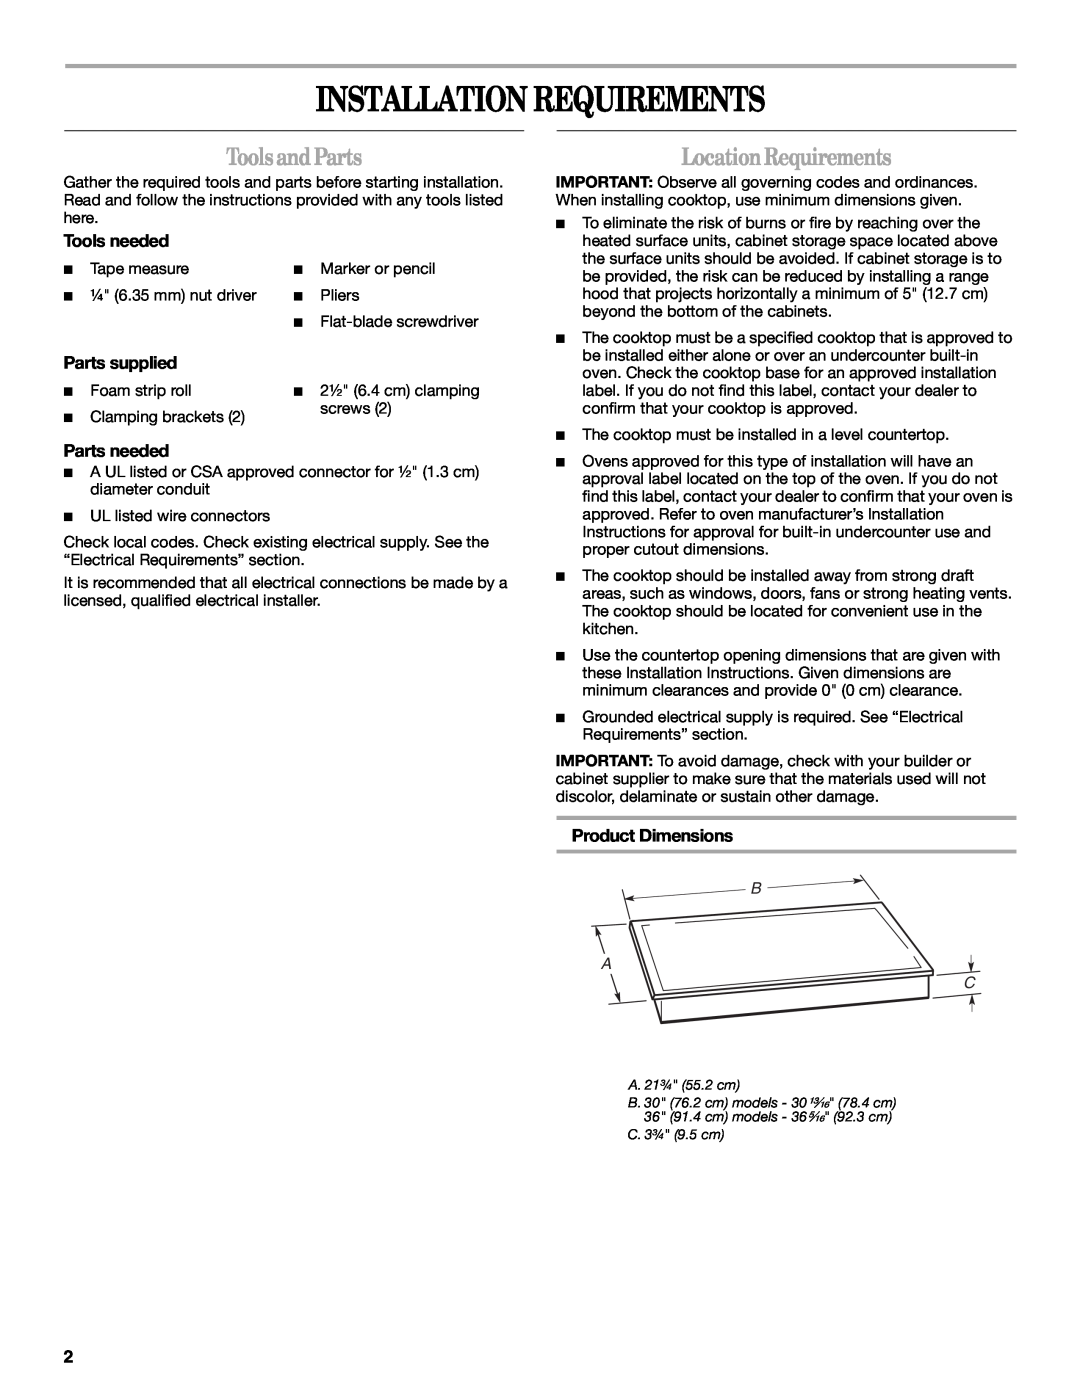 Whirlpool W10346695A installation instructions Installation Requirements, Tools and Parts, LocationRequirements, B A C 